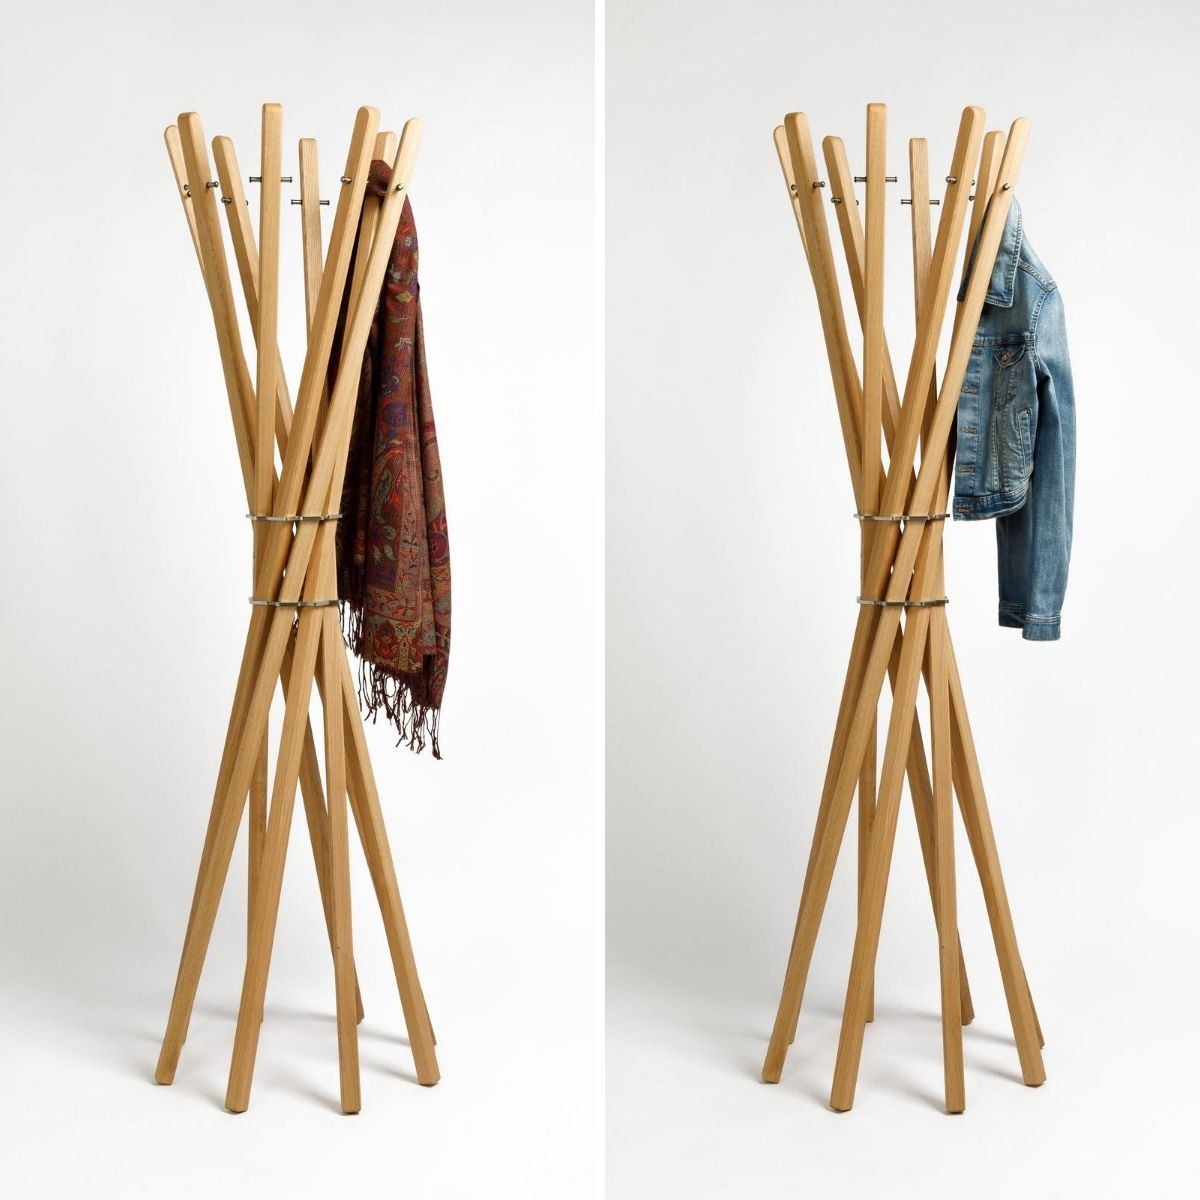 Design Clothes Rack / Hall Stand made of Solid Oak Wood